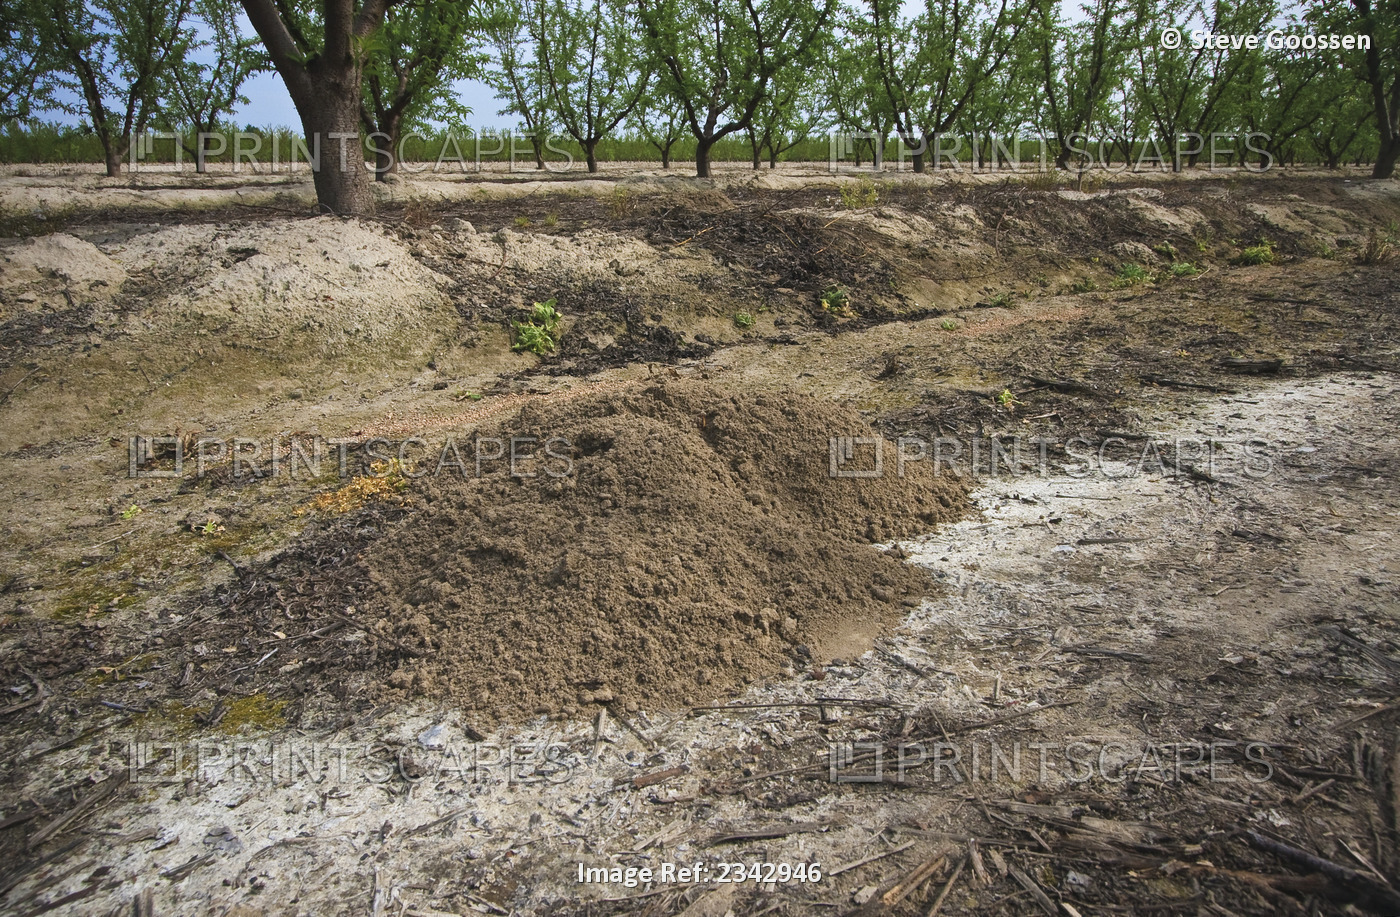 Agriculture - Gopher mounds in a stone fruit orchard. Gophers can damage the ...